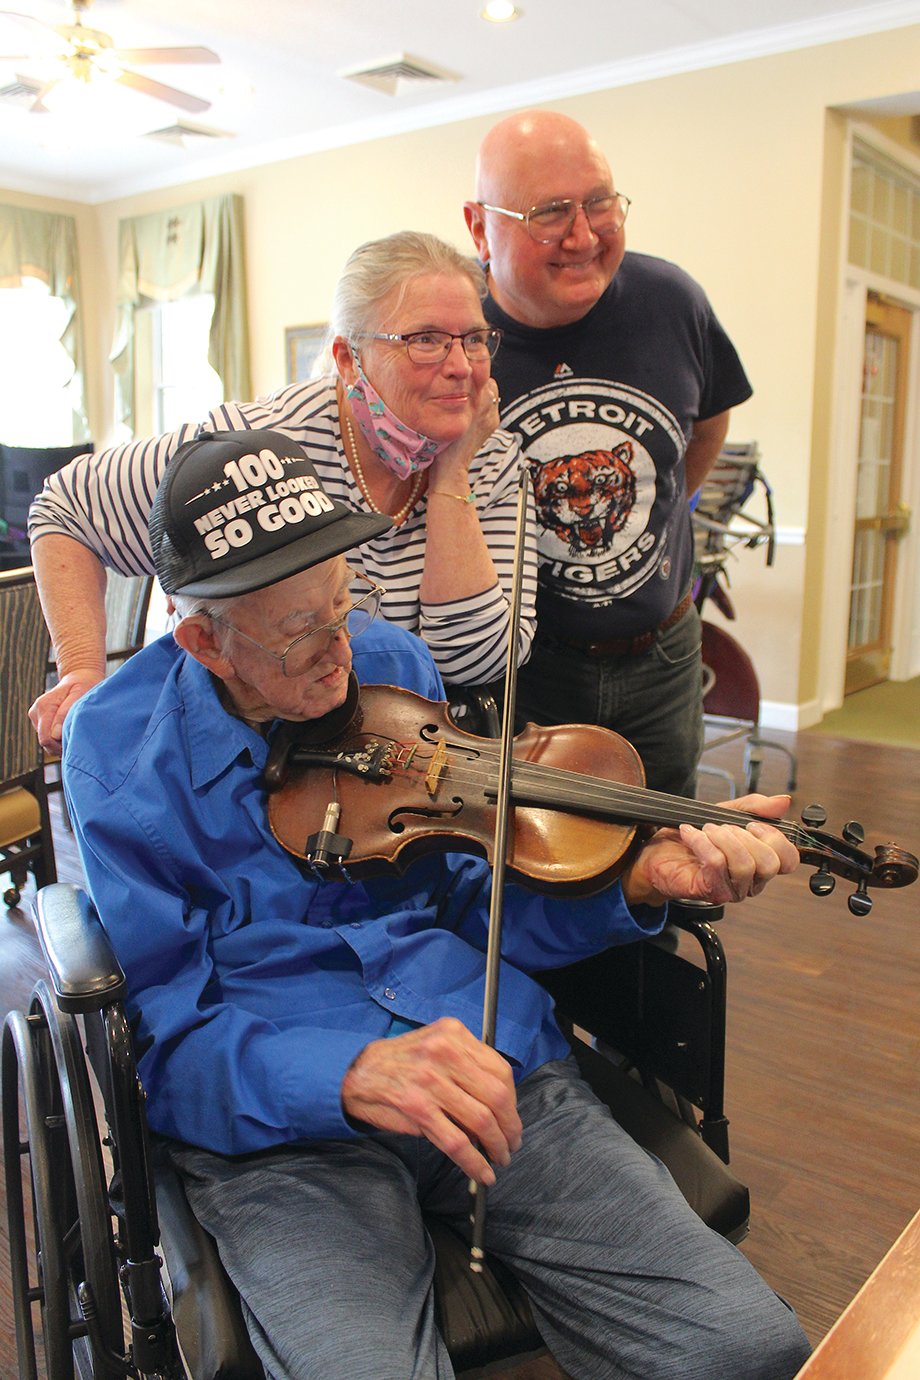 Soon-to-be centenarian Archie Krout shows the staff and residents of Bickford Memory Care that he can still play a mean fiddle Wednesday ahead of his 100th birthday alongside his daughter and son-in-law Linda and Mike McKinnon.